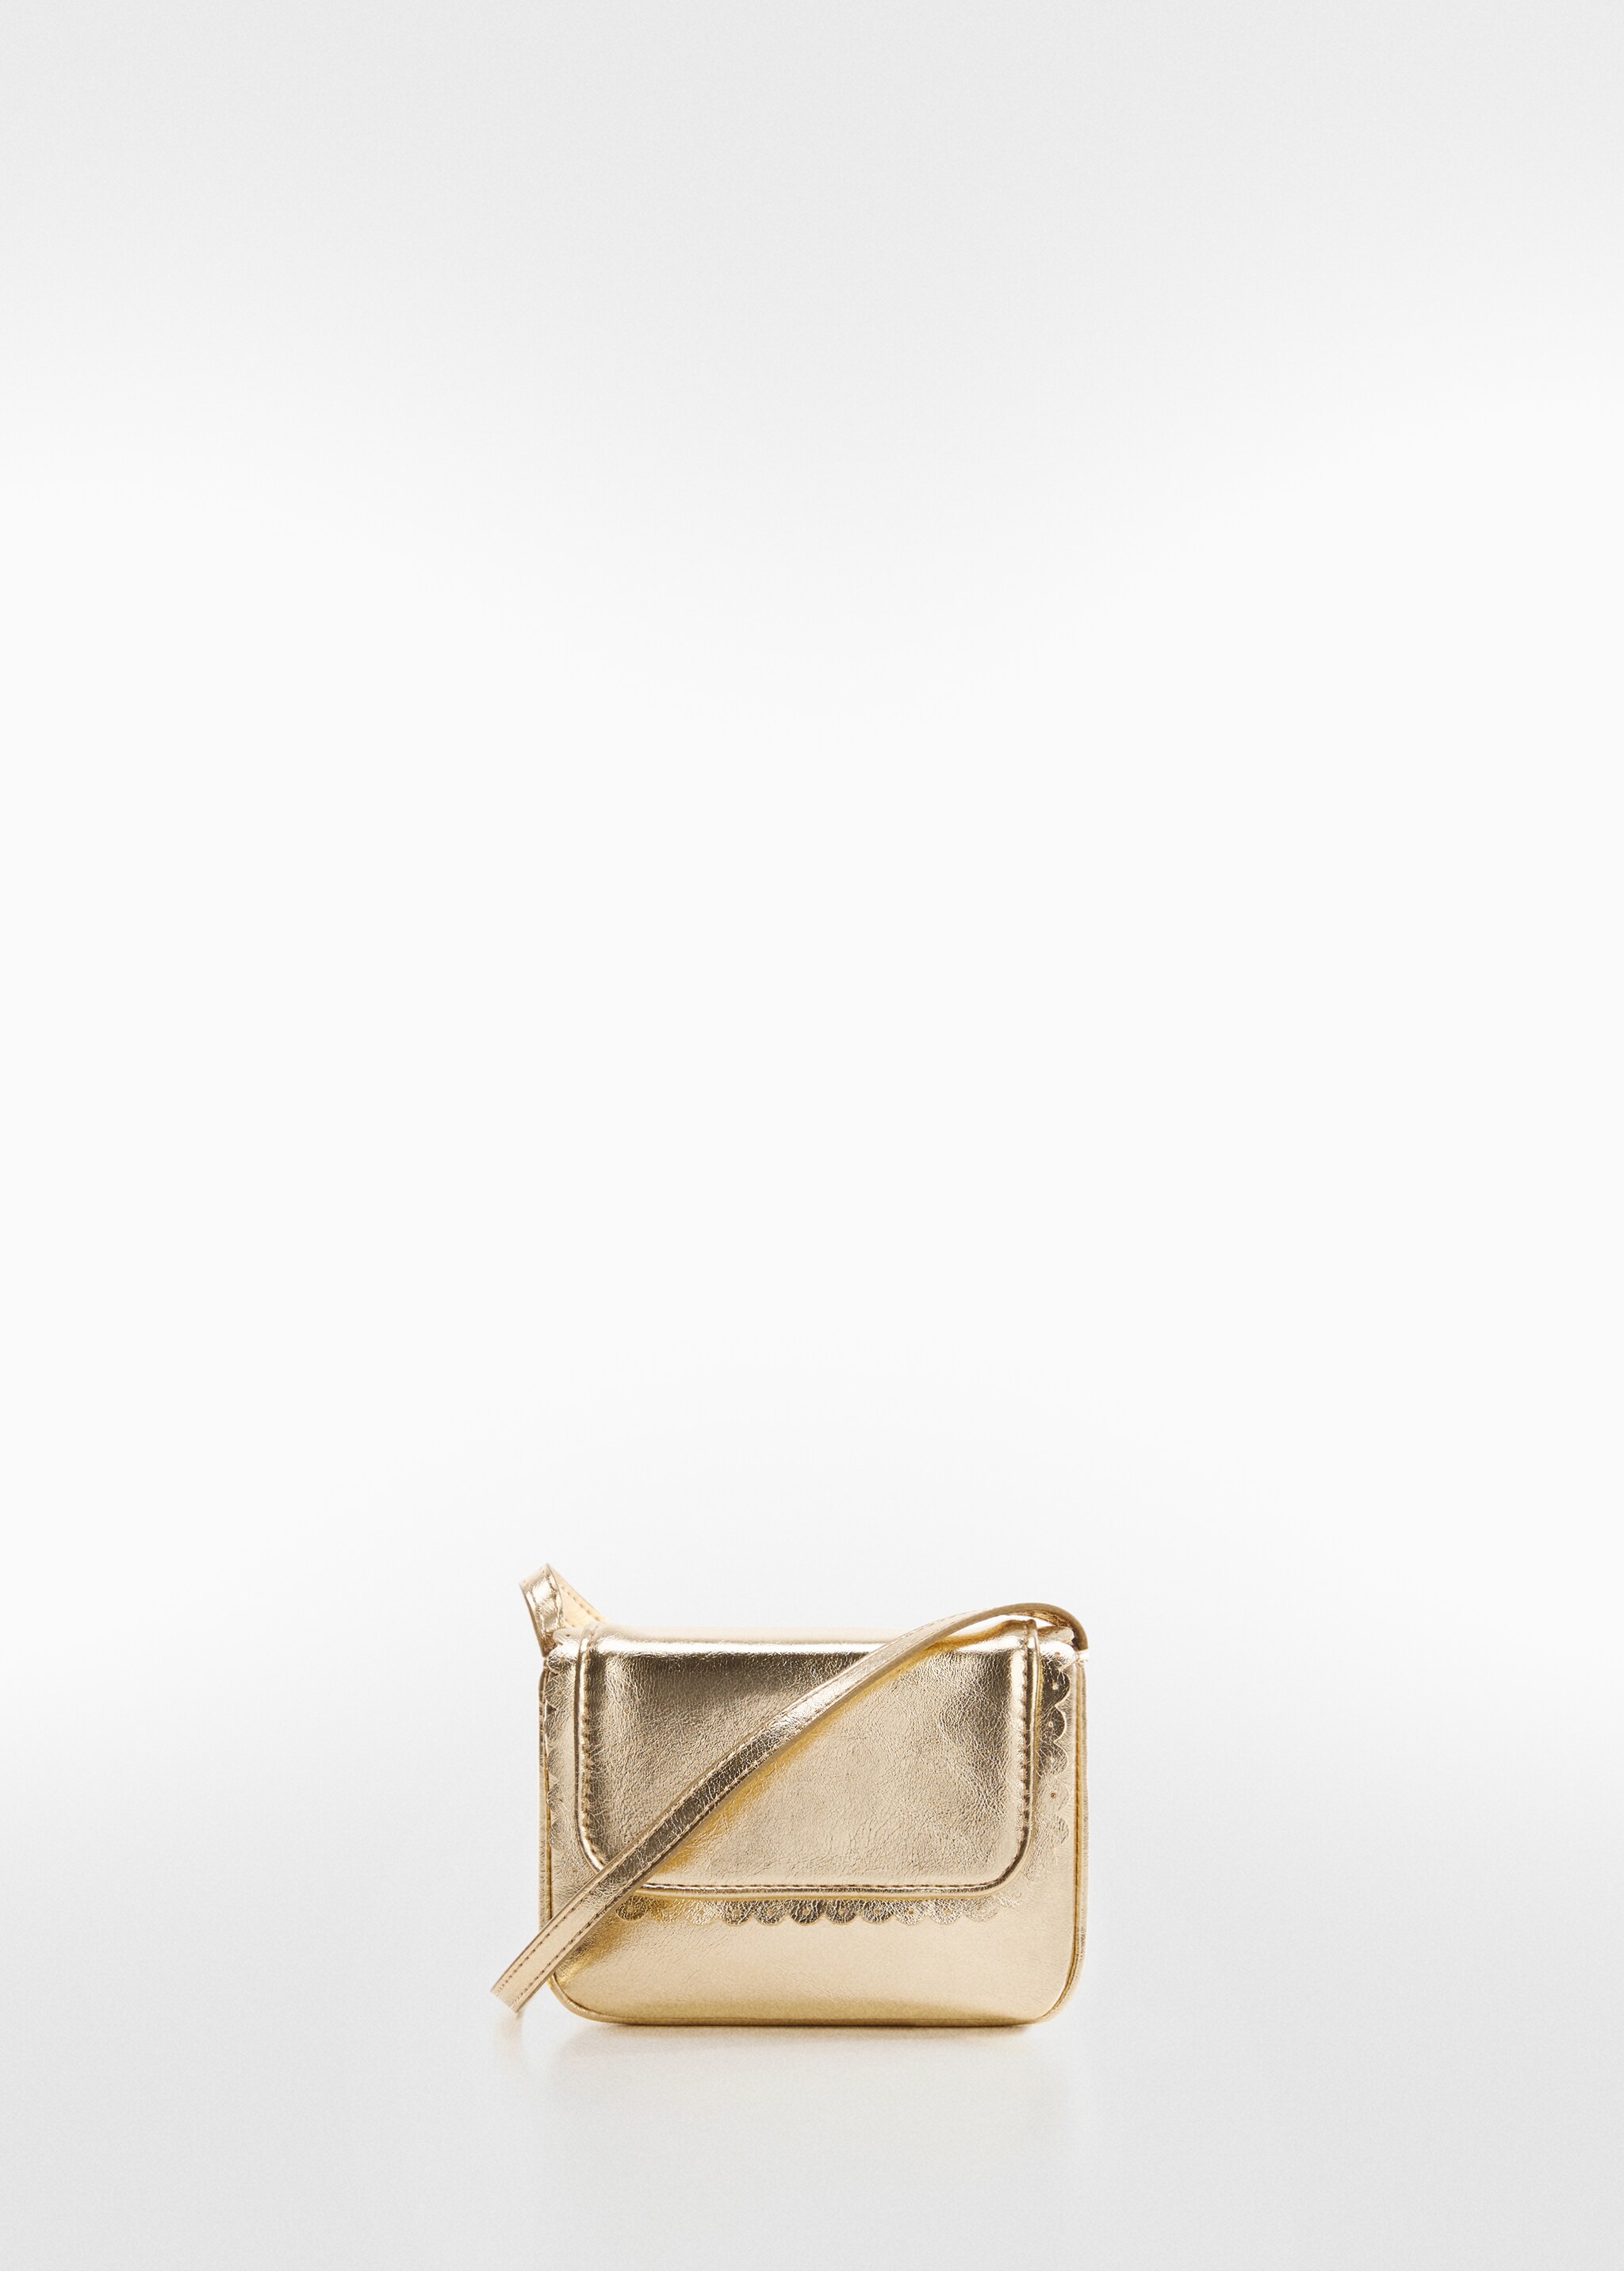 Small metallic bag - Article without model